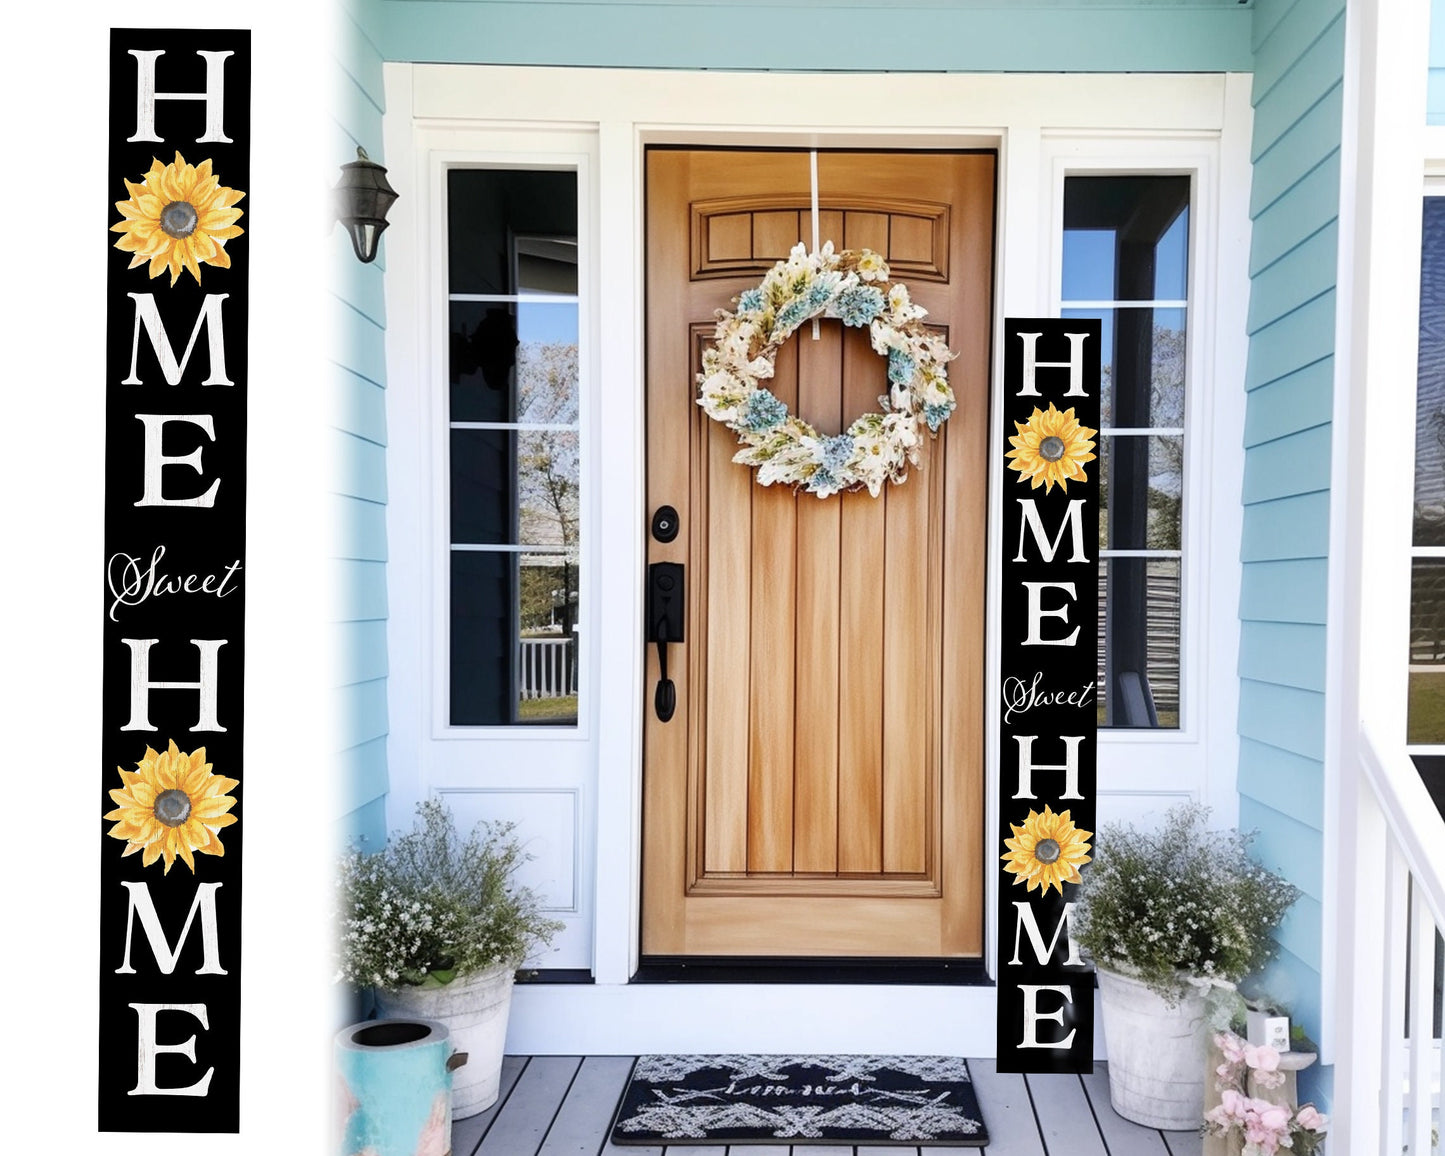 72in Sunflower Home Sweet Home Sign | Rustic Wood Front Door Decor | Farmhouse Porch Sign Decorations | Patio Decor | Wooden Decor